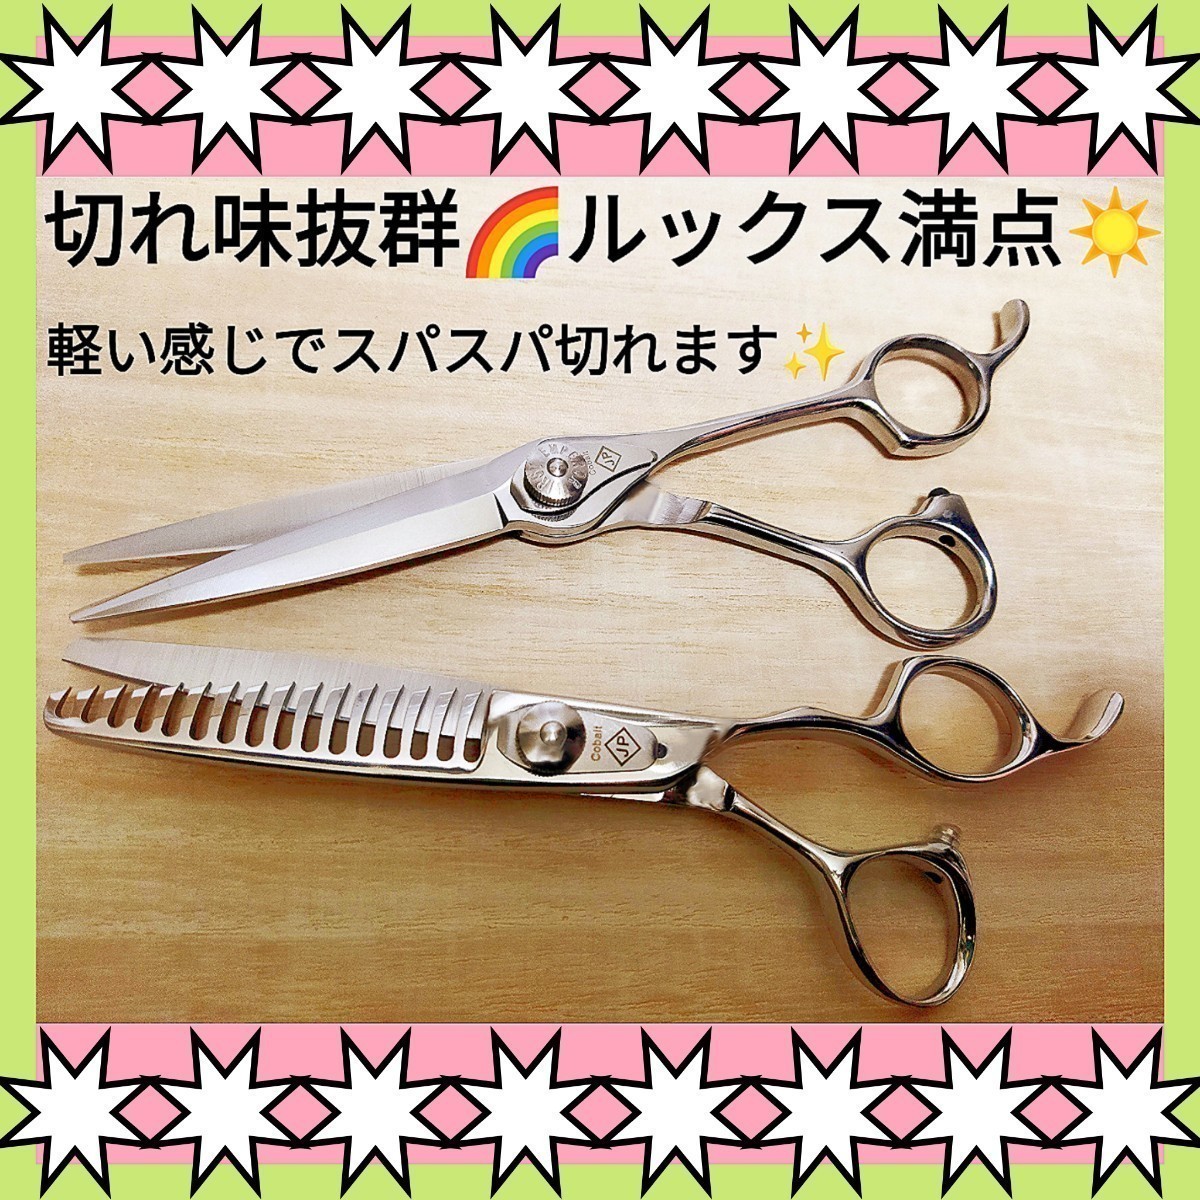  sharpness eminent Naruto si The - same . times attaching tongs beauty . professional se person gsi The -spa. comfortable torn. * tongs * Barber . trimmer * trimming pet *